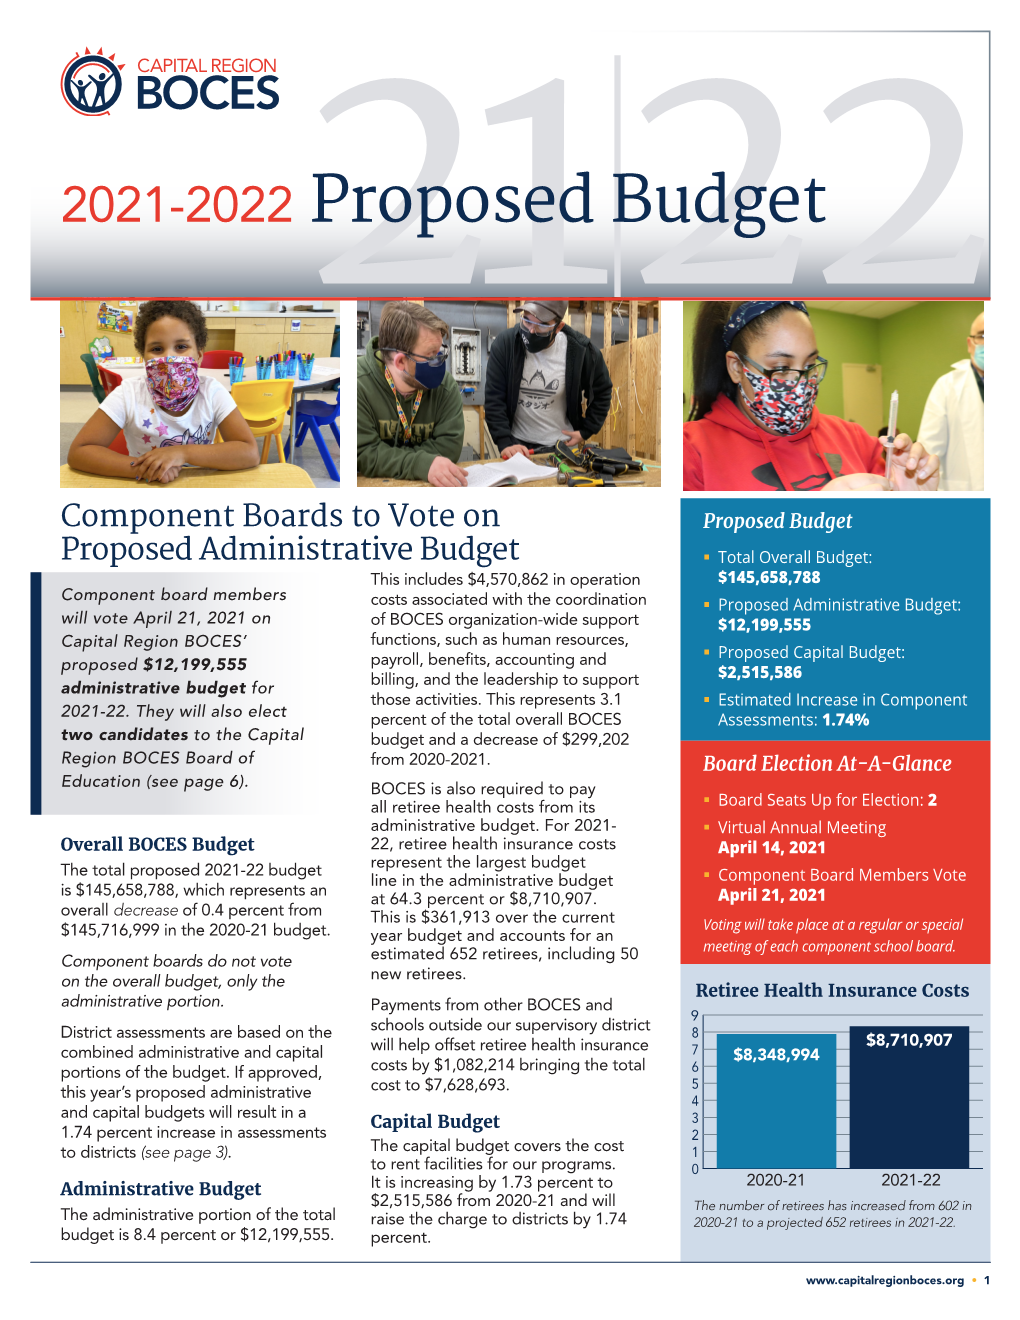 Capital Region BOCES Proposed Budget